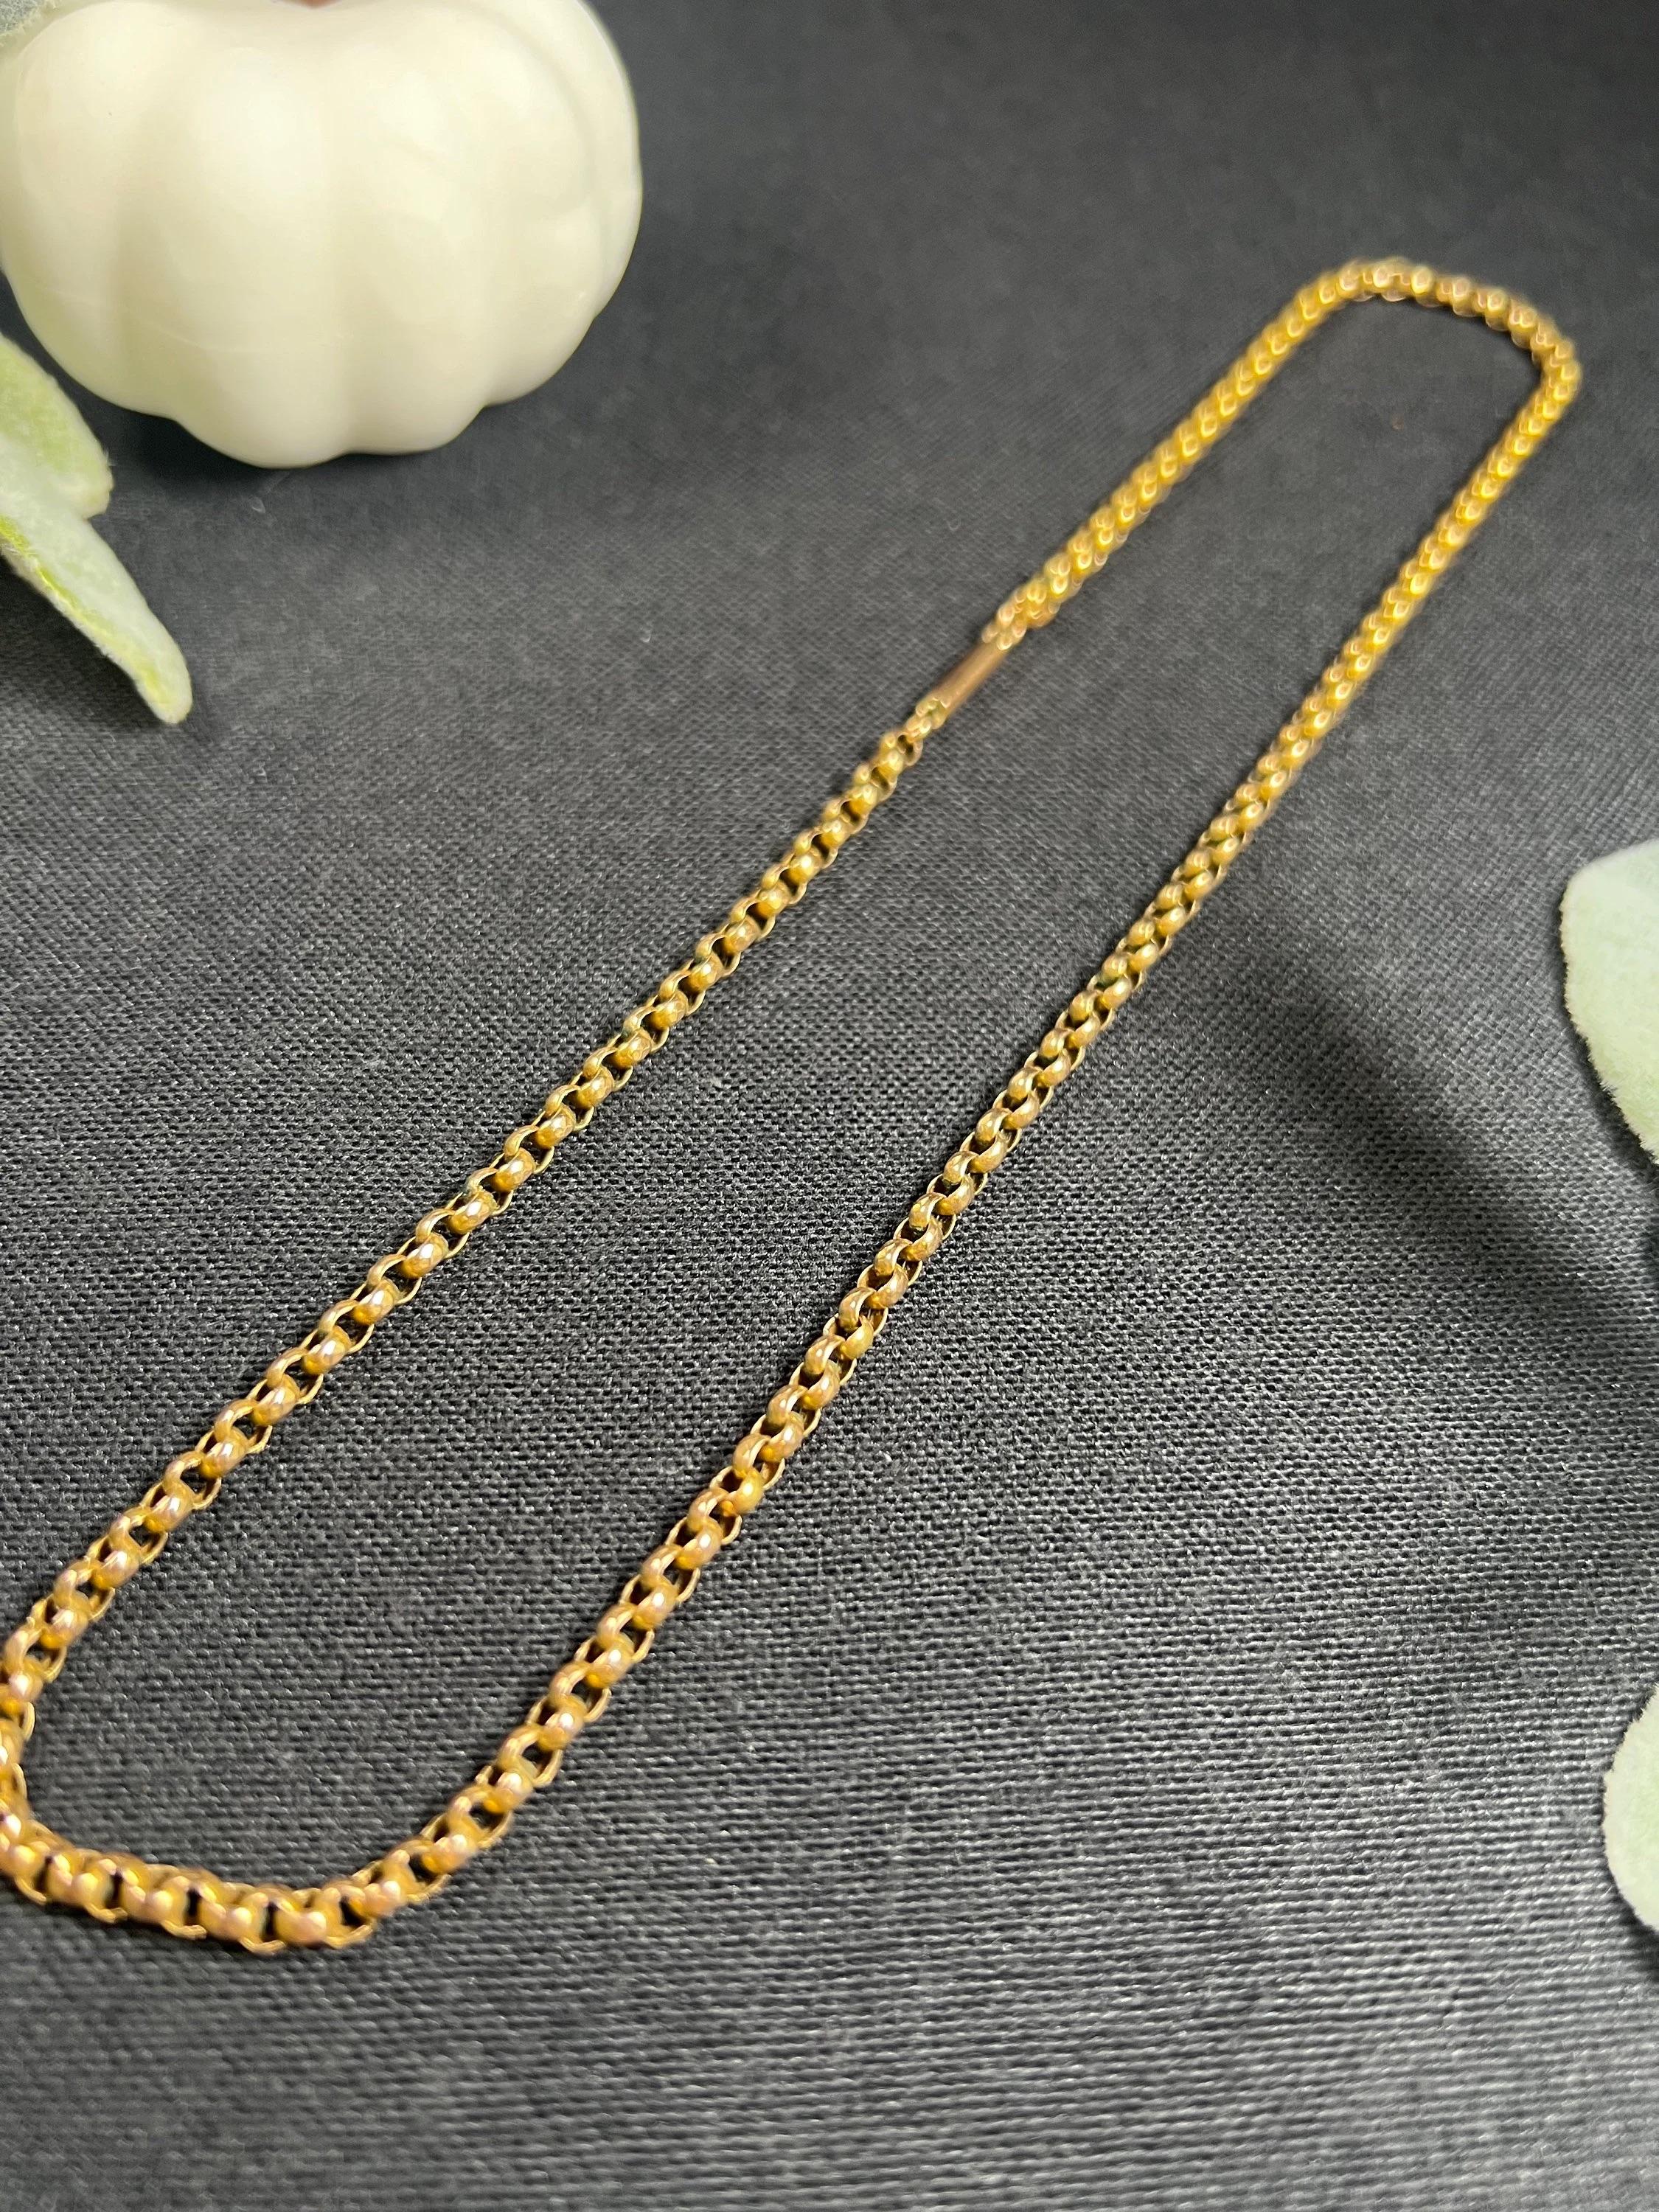 Antique 9ct Gold Edwardian Faceted Belcher Link Chain with Barrel Clasp For Sale 4